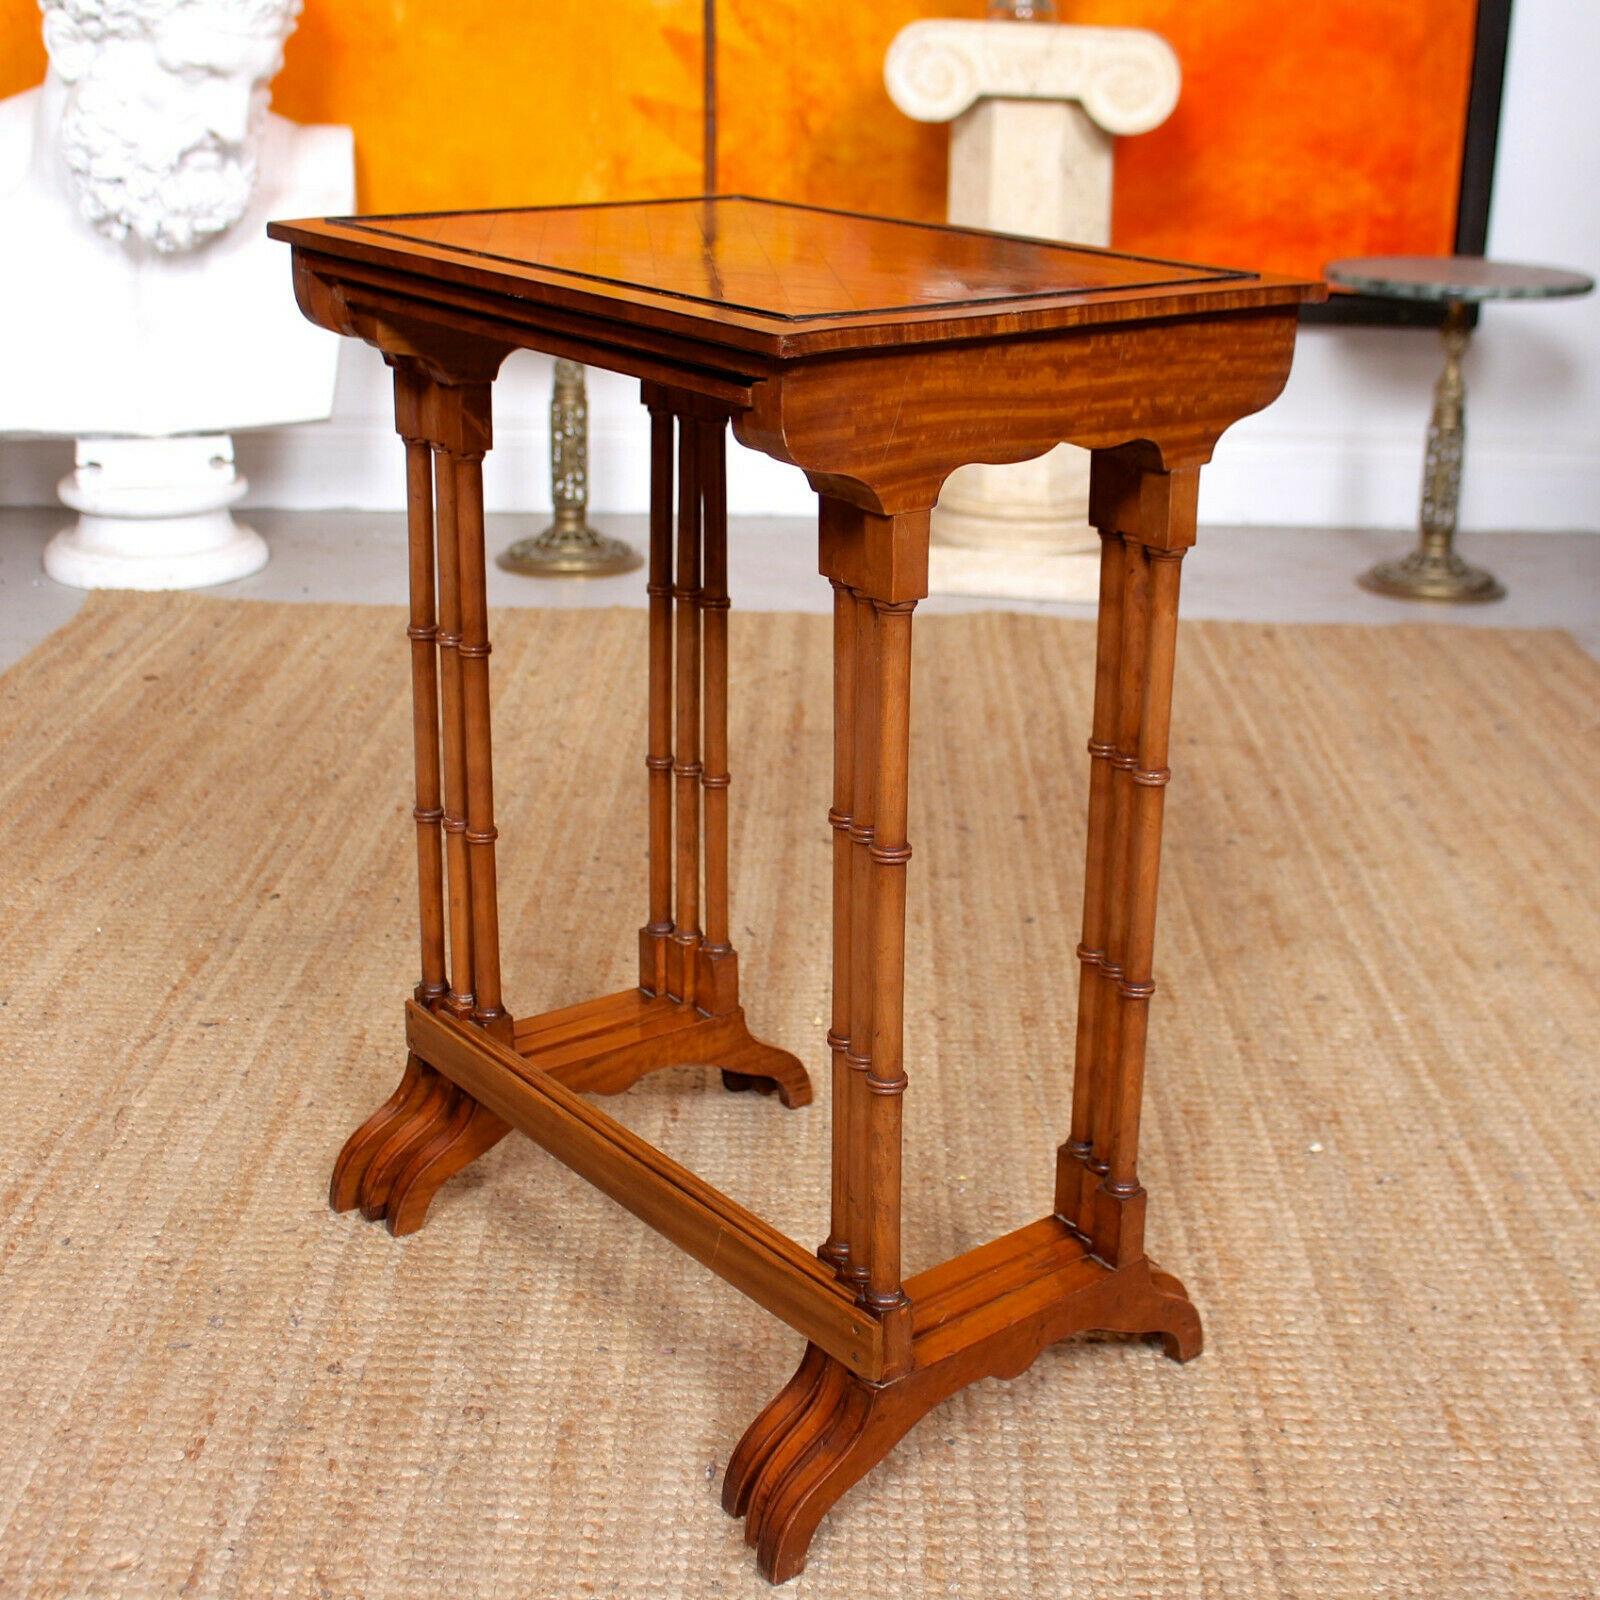 English Nest of Tables Satinwood Crossbanded 3 Side Tables Tall Georgian For Sale 7